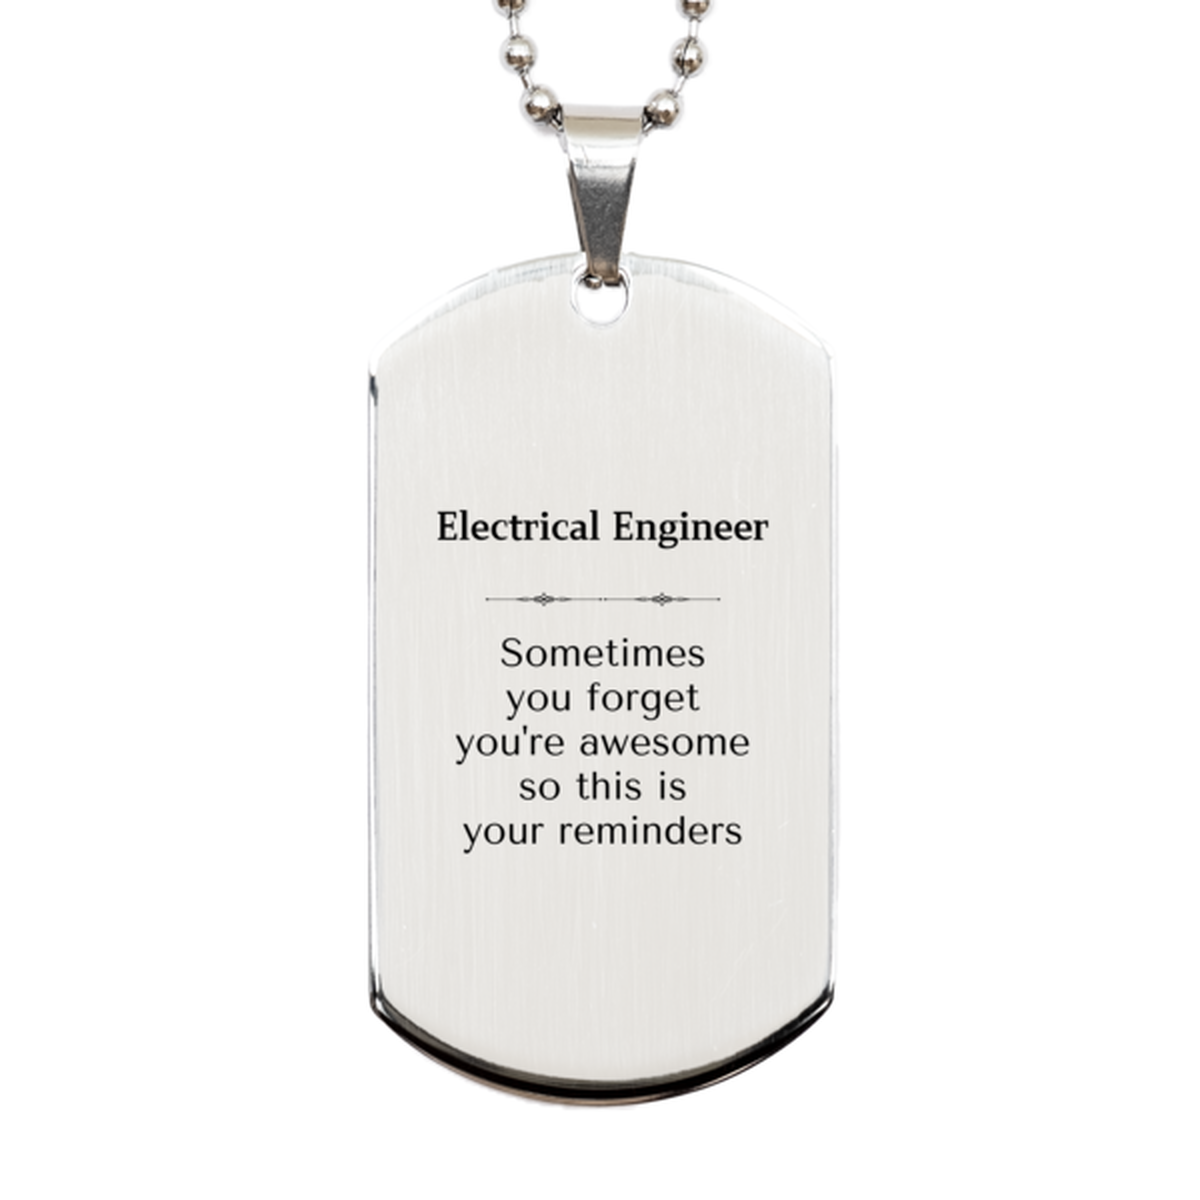 Sentimental Electrical Engineer Silver Dog Tag, Electrical Engineer Sometimes you forget you're awesome so this is your reminders, Graduation Christmas Birthday Gifts for Electrical Engineer, Men, Women, Coworkers